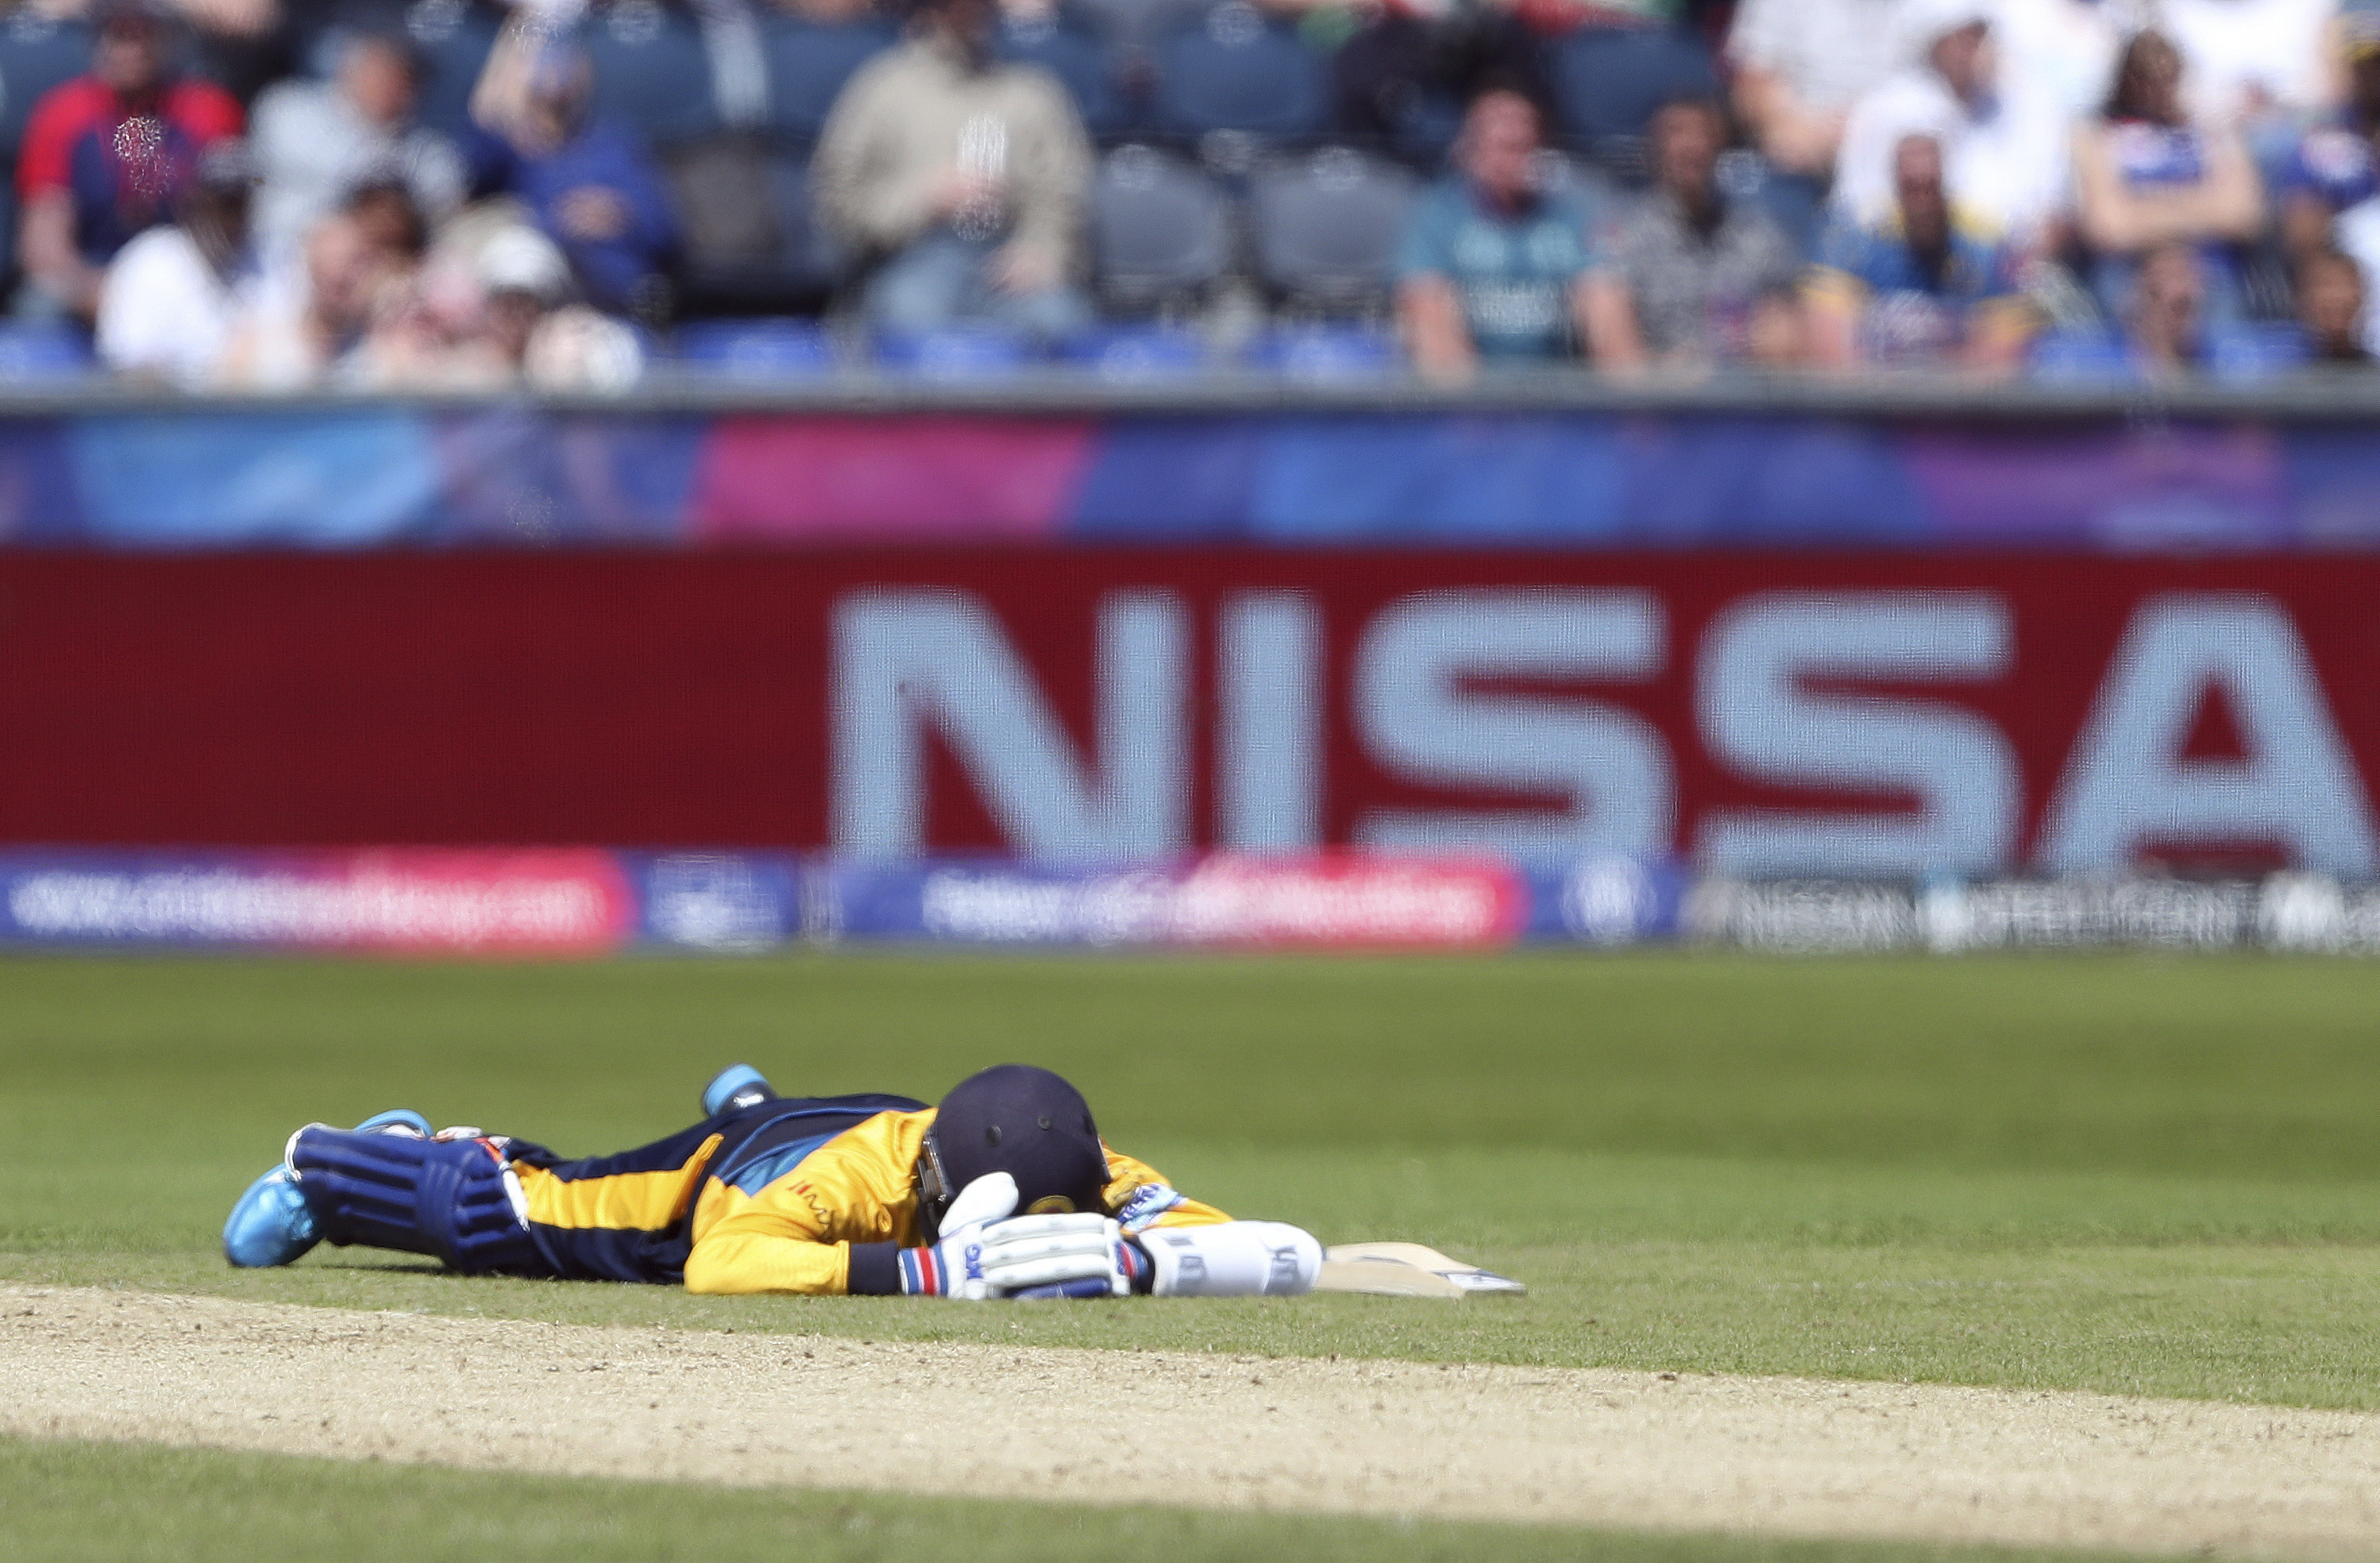 A Sri Lanka player laying face down on the ground to avoid a swarm of bees that have come across the ground during the Cricket World Cup match between Sri Lanka and South Africa 